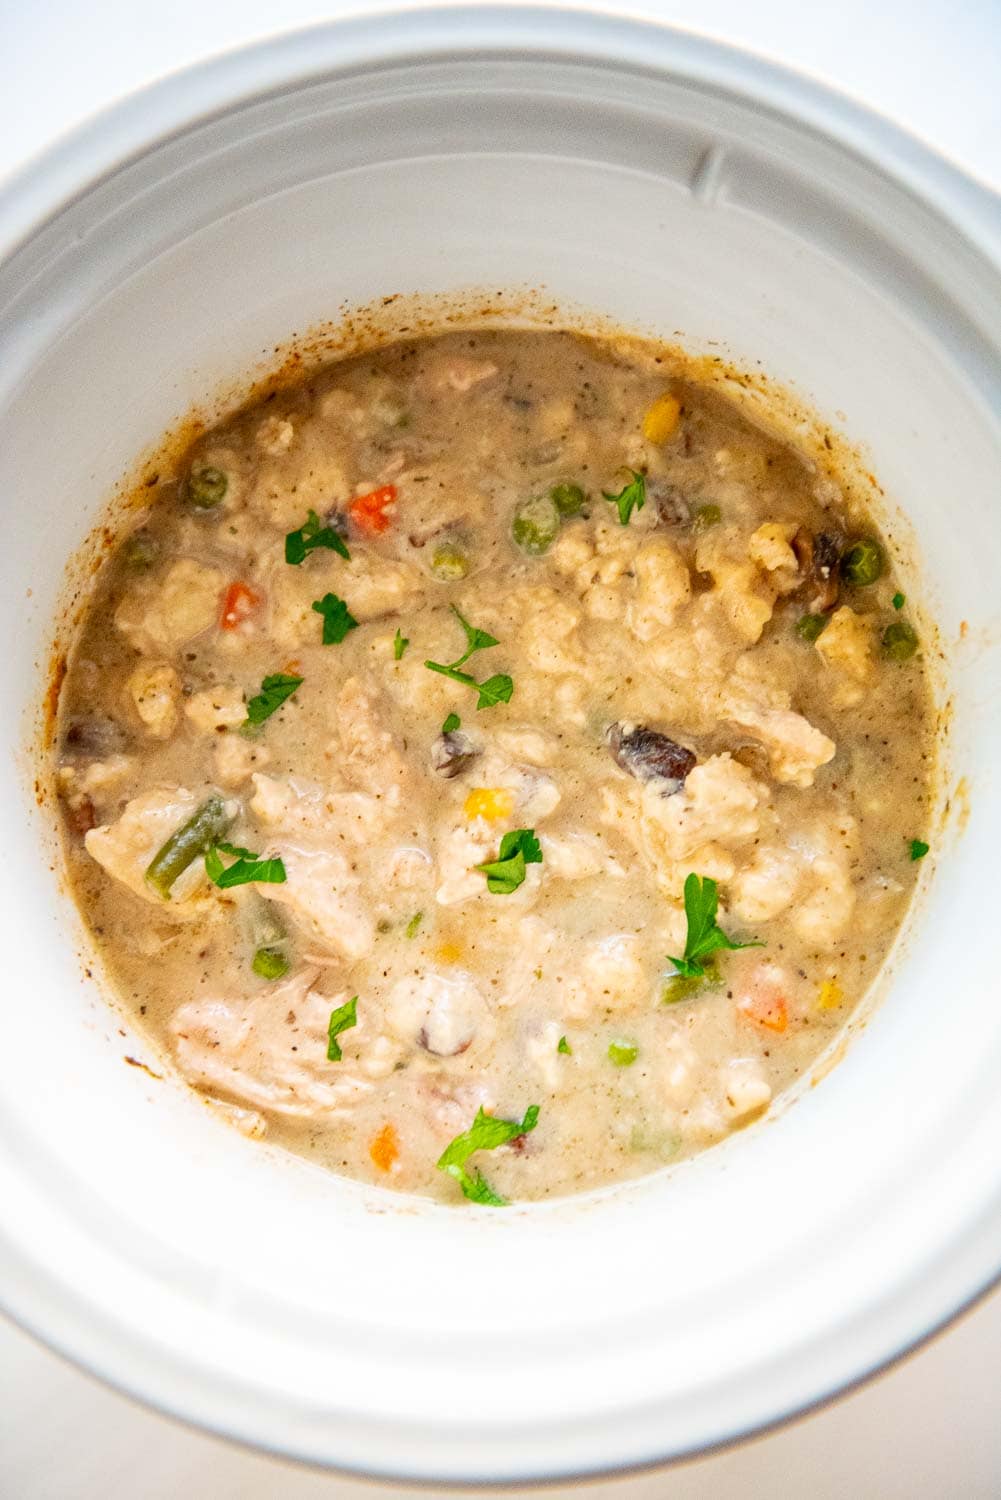 Thickened mix of chicken, vegetables, broth, and flour mixture in slow cooker